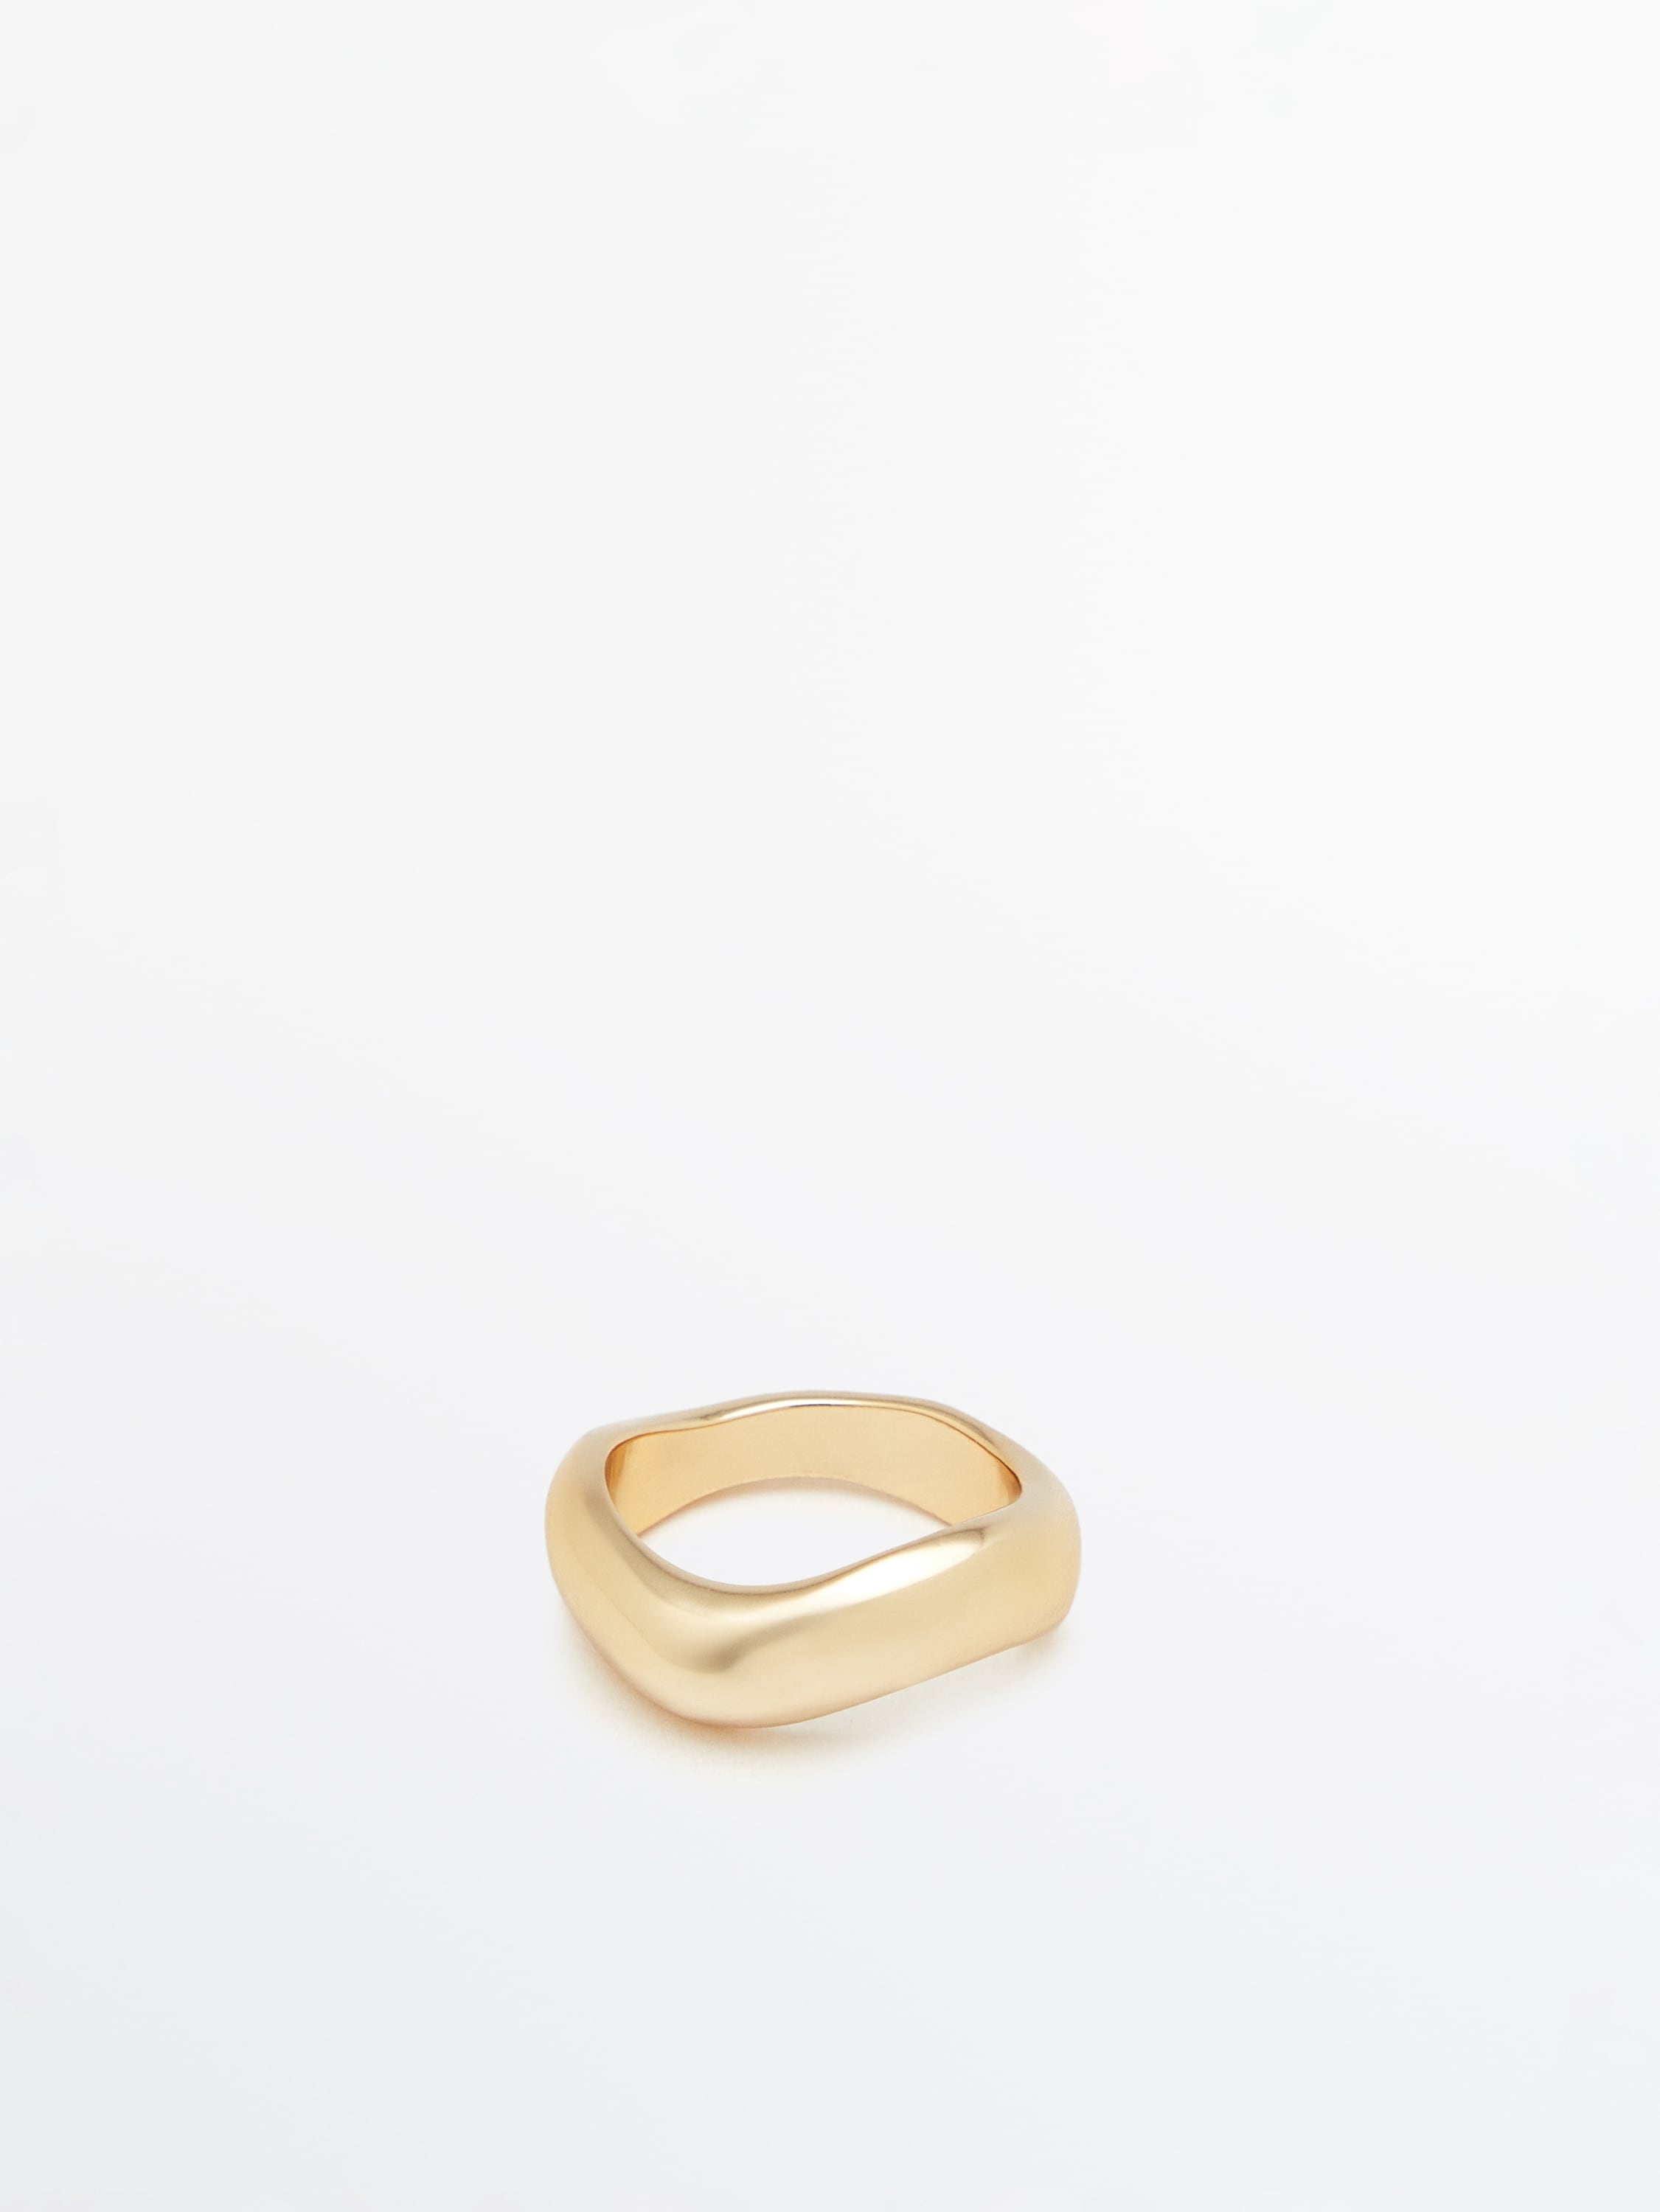 Pack of gold-plated asymmetric rings